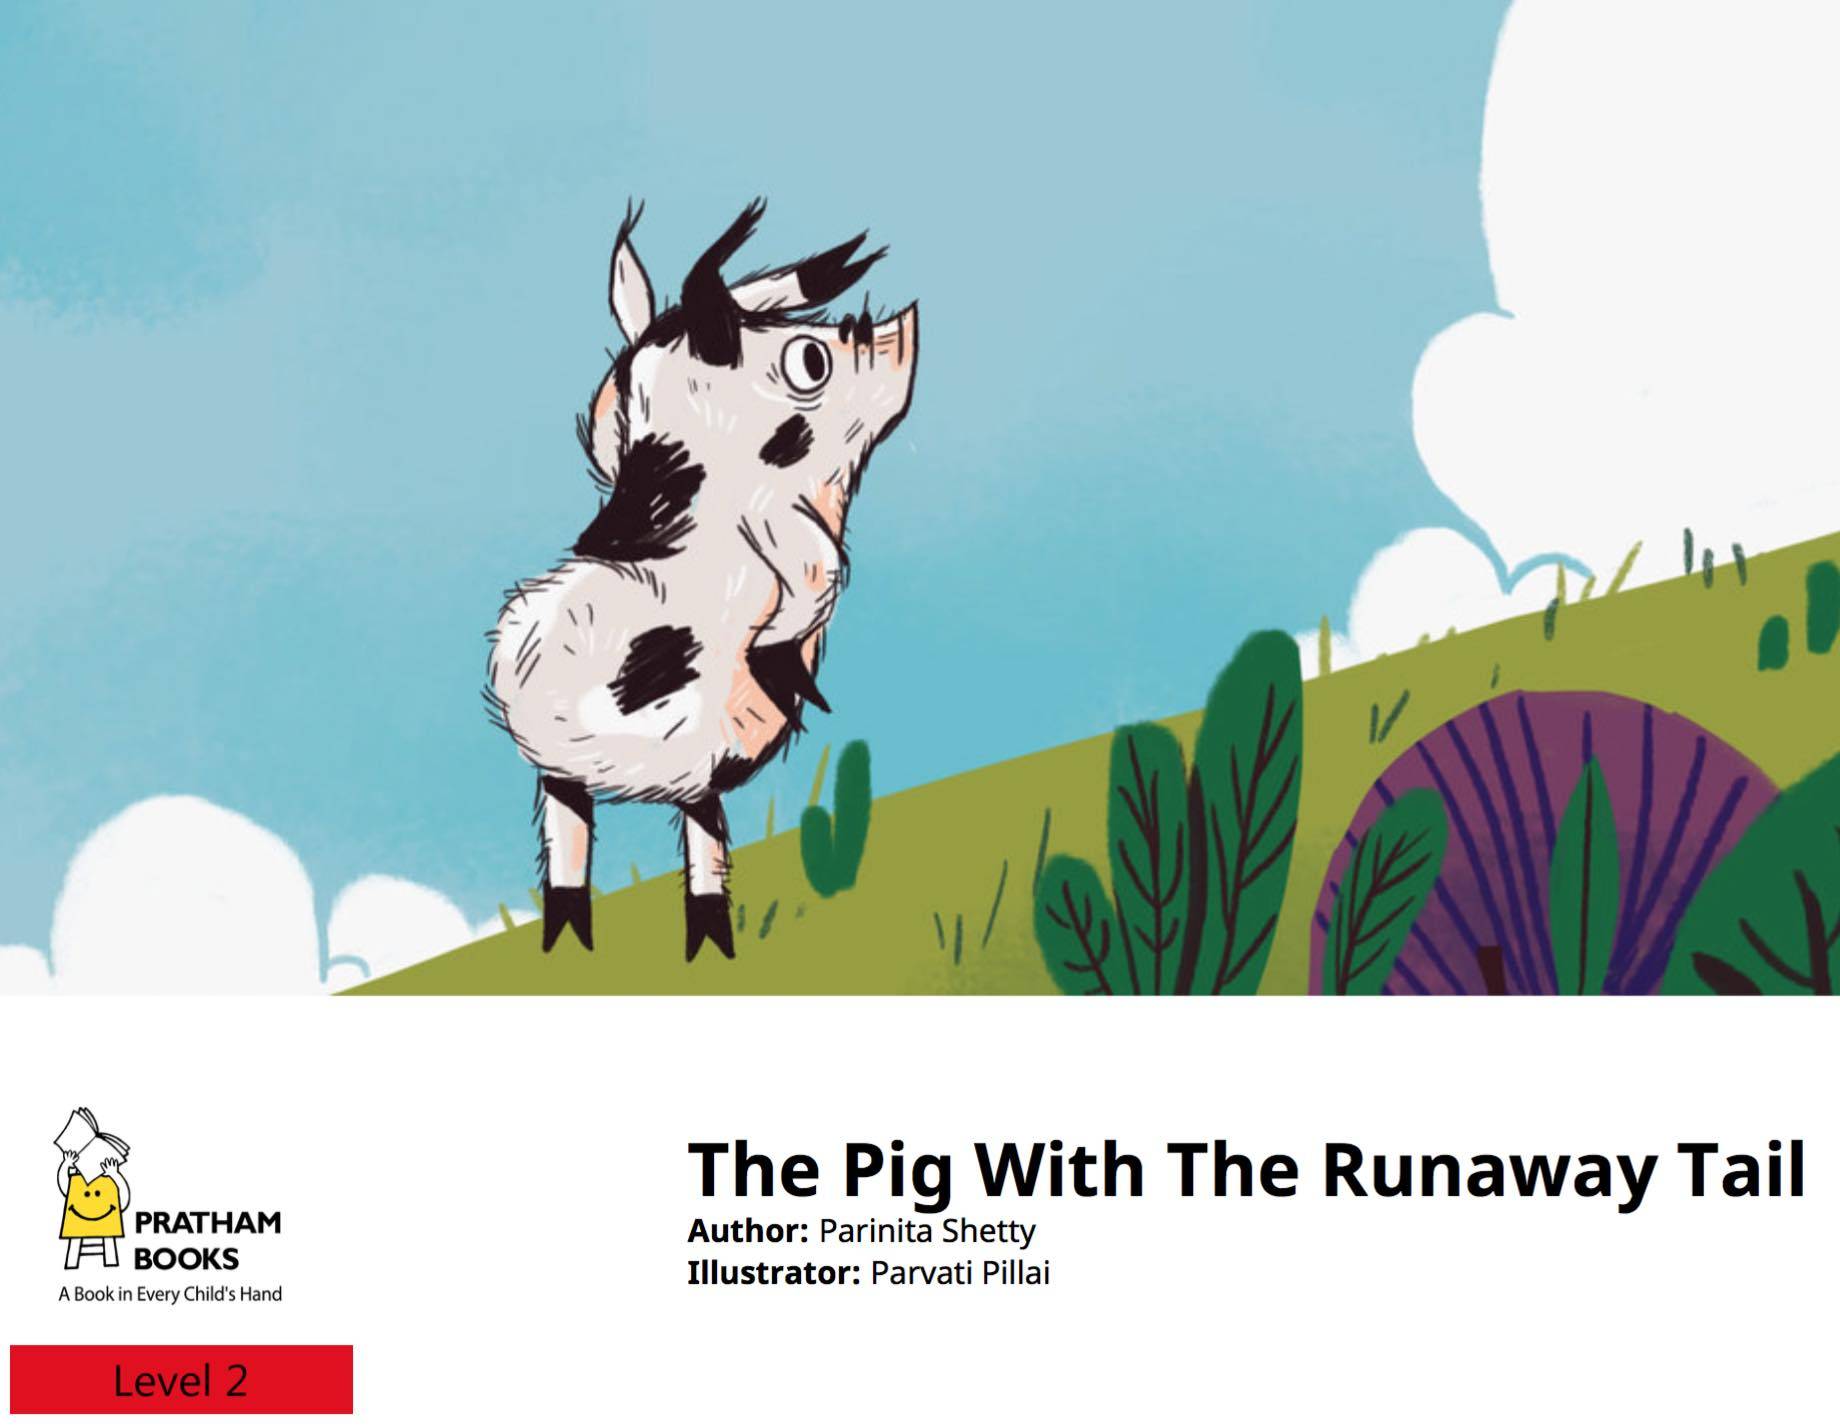 The Pig with the Runaway Tail, Adventure meets imagination